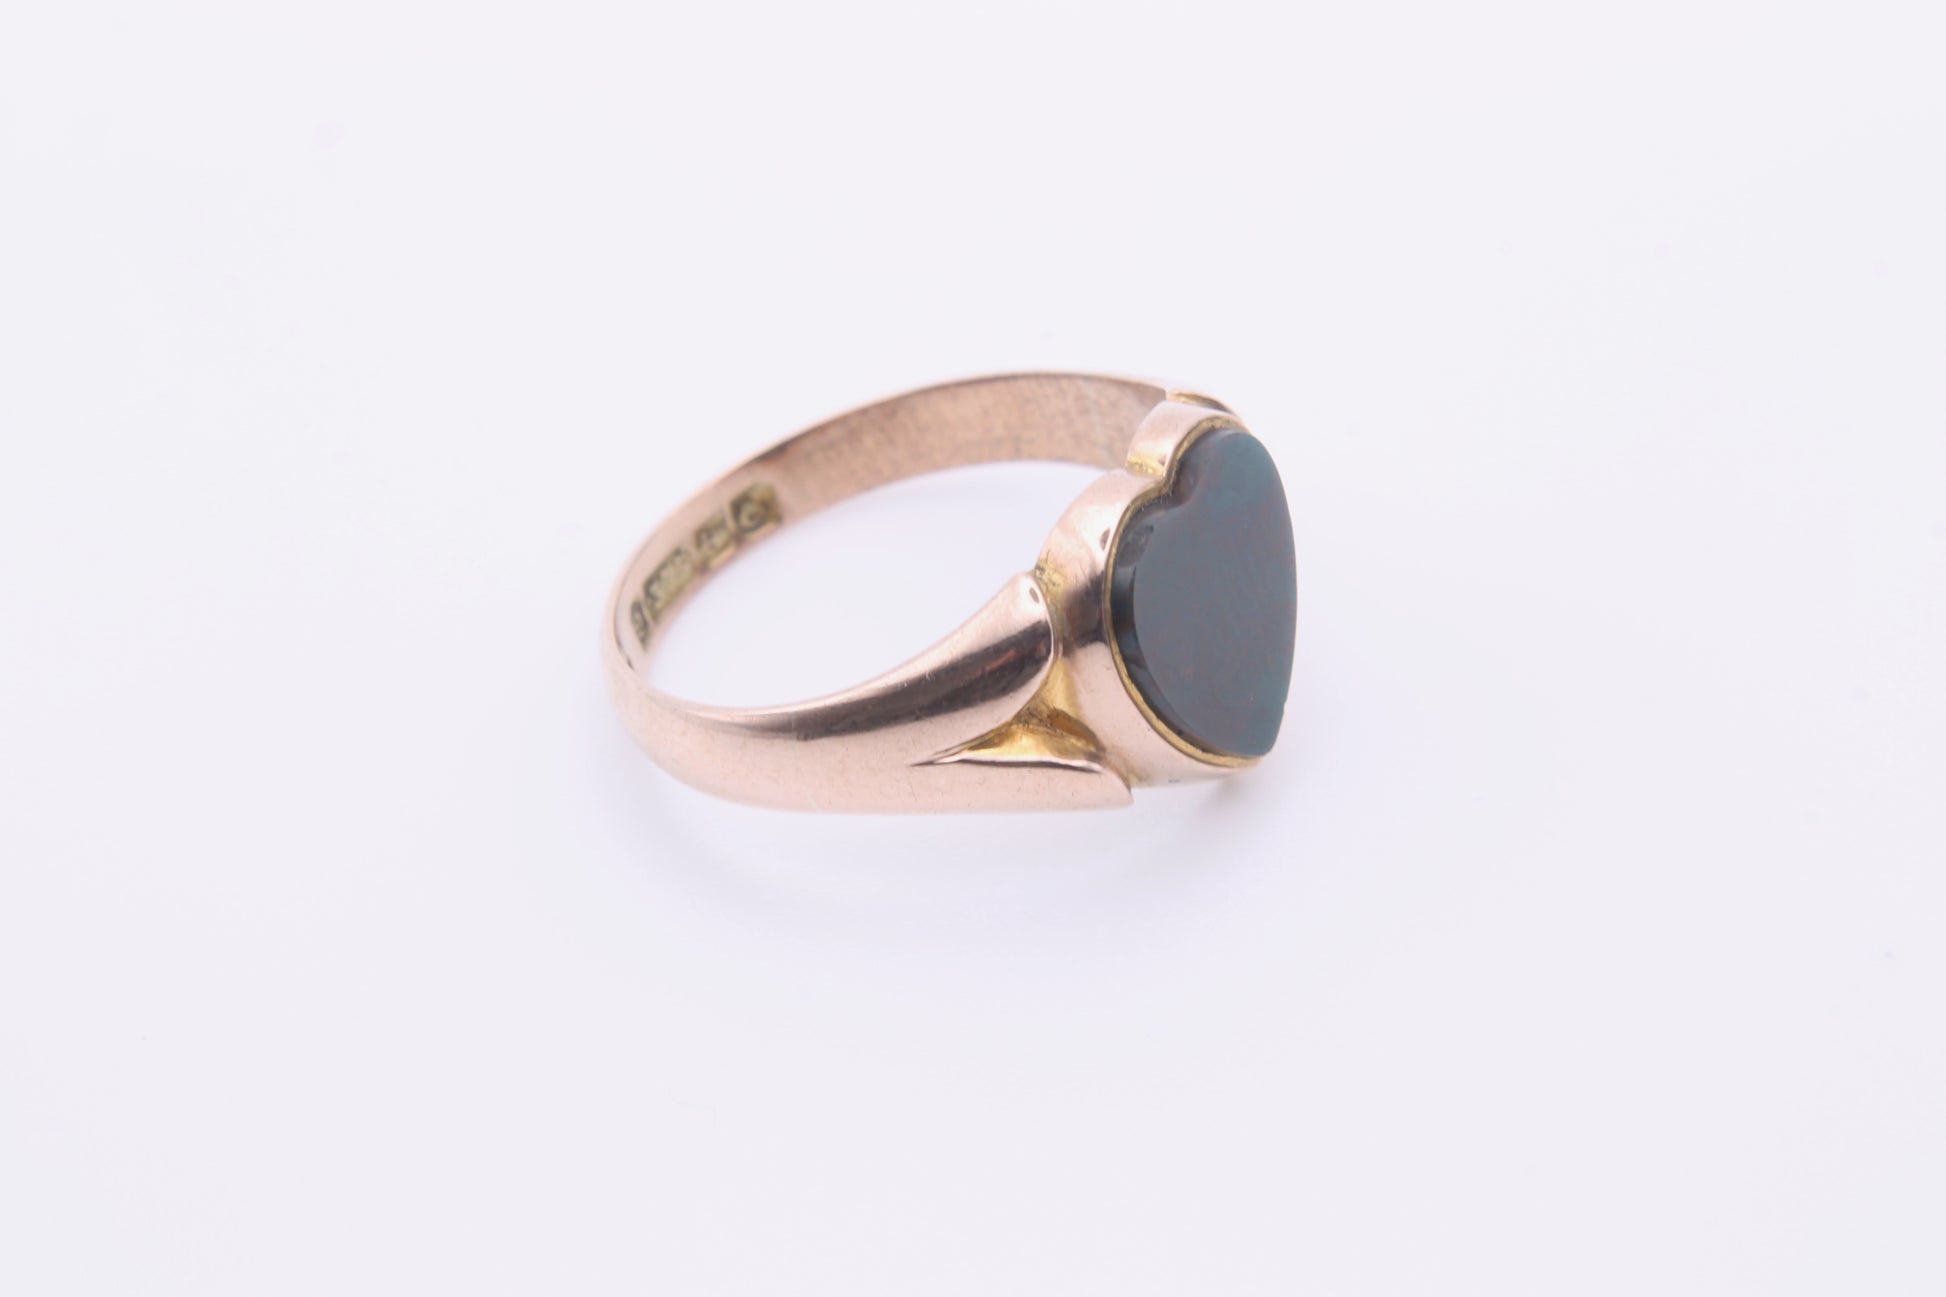 victorian-18ct-gold-bloodstone-signet-ring